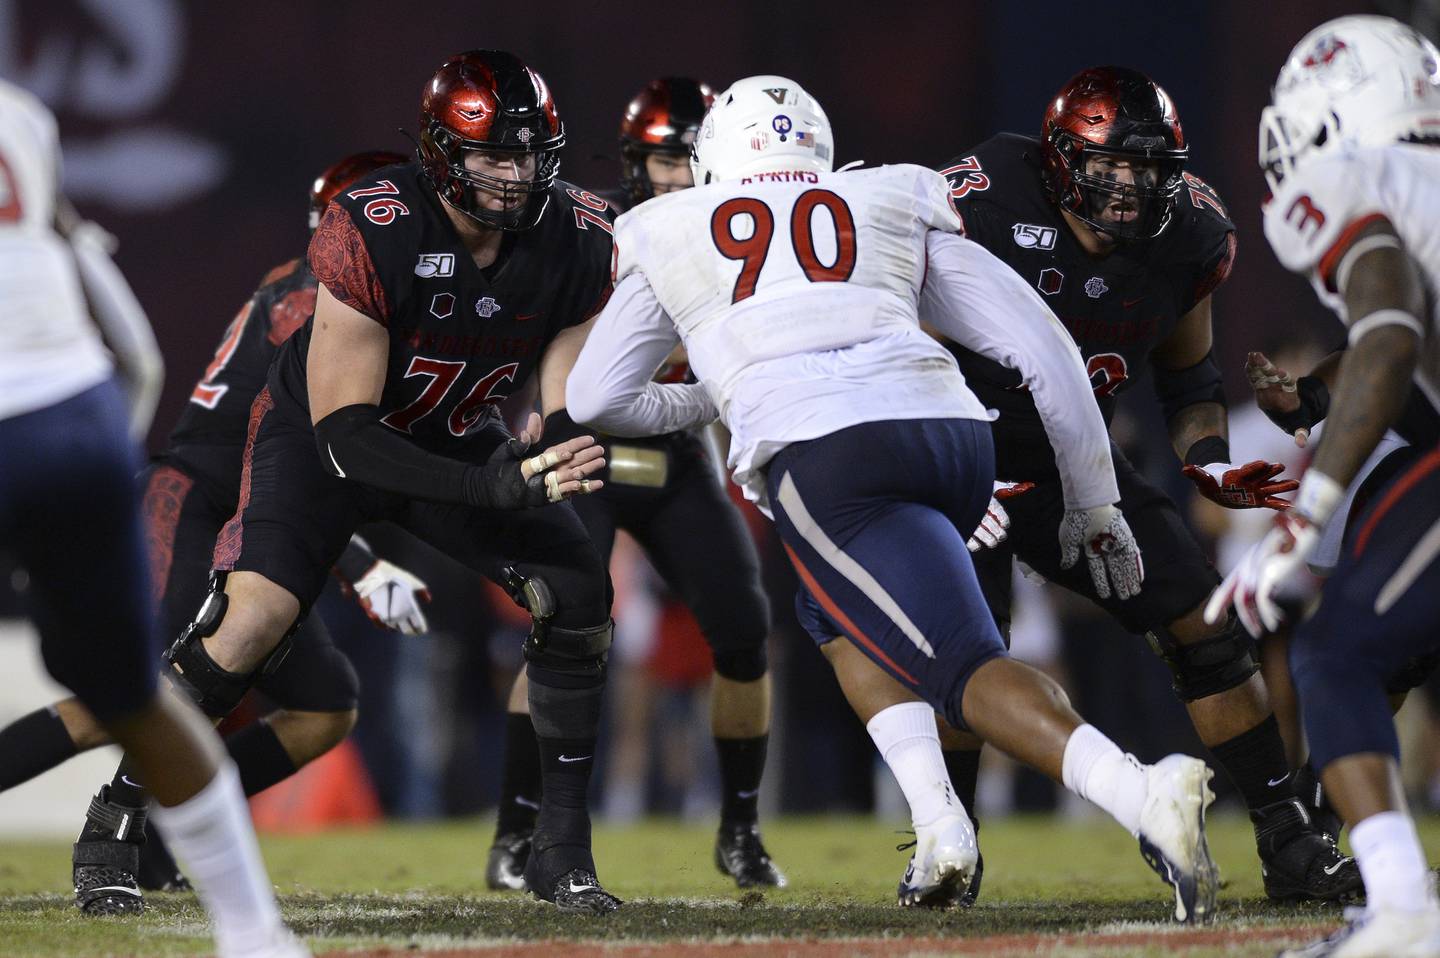 San Diego State offensive lineman Zachary Thomas, left, blocks Fresno State defensive tackle Kevin Atkins during a game on Nov. 15, 2019, in San Diego.